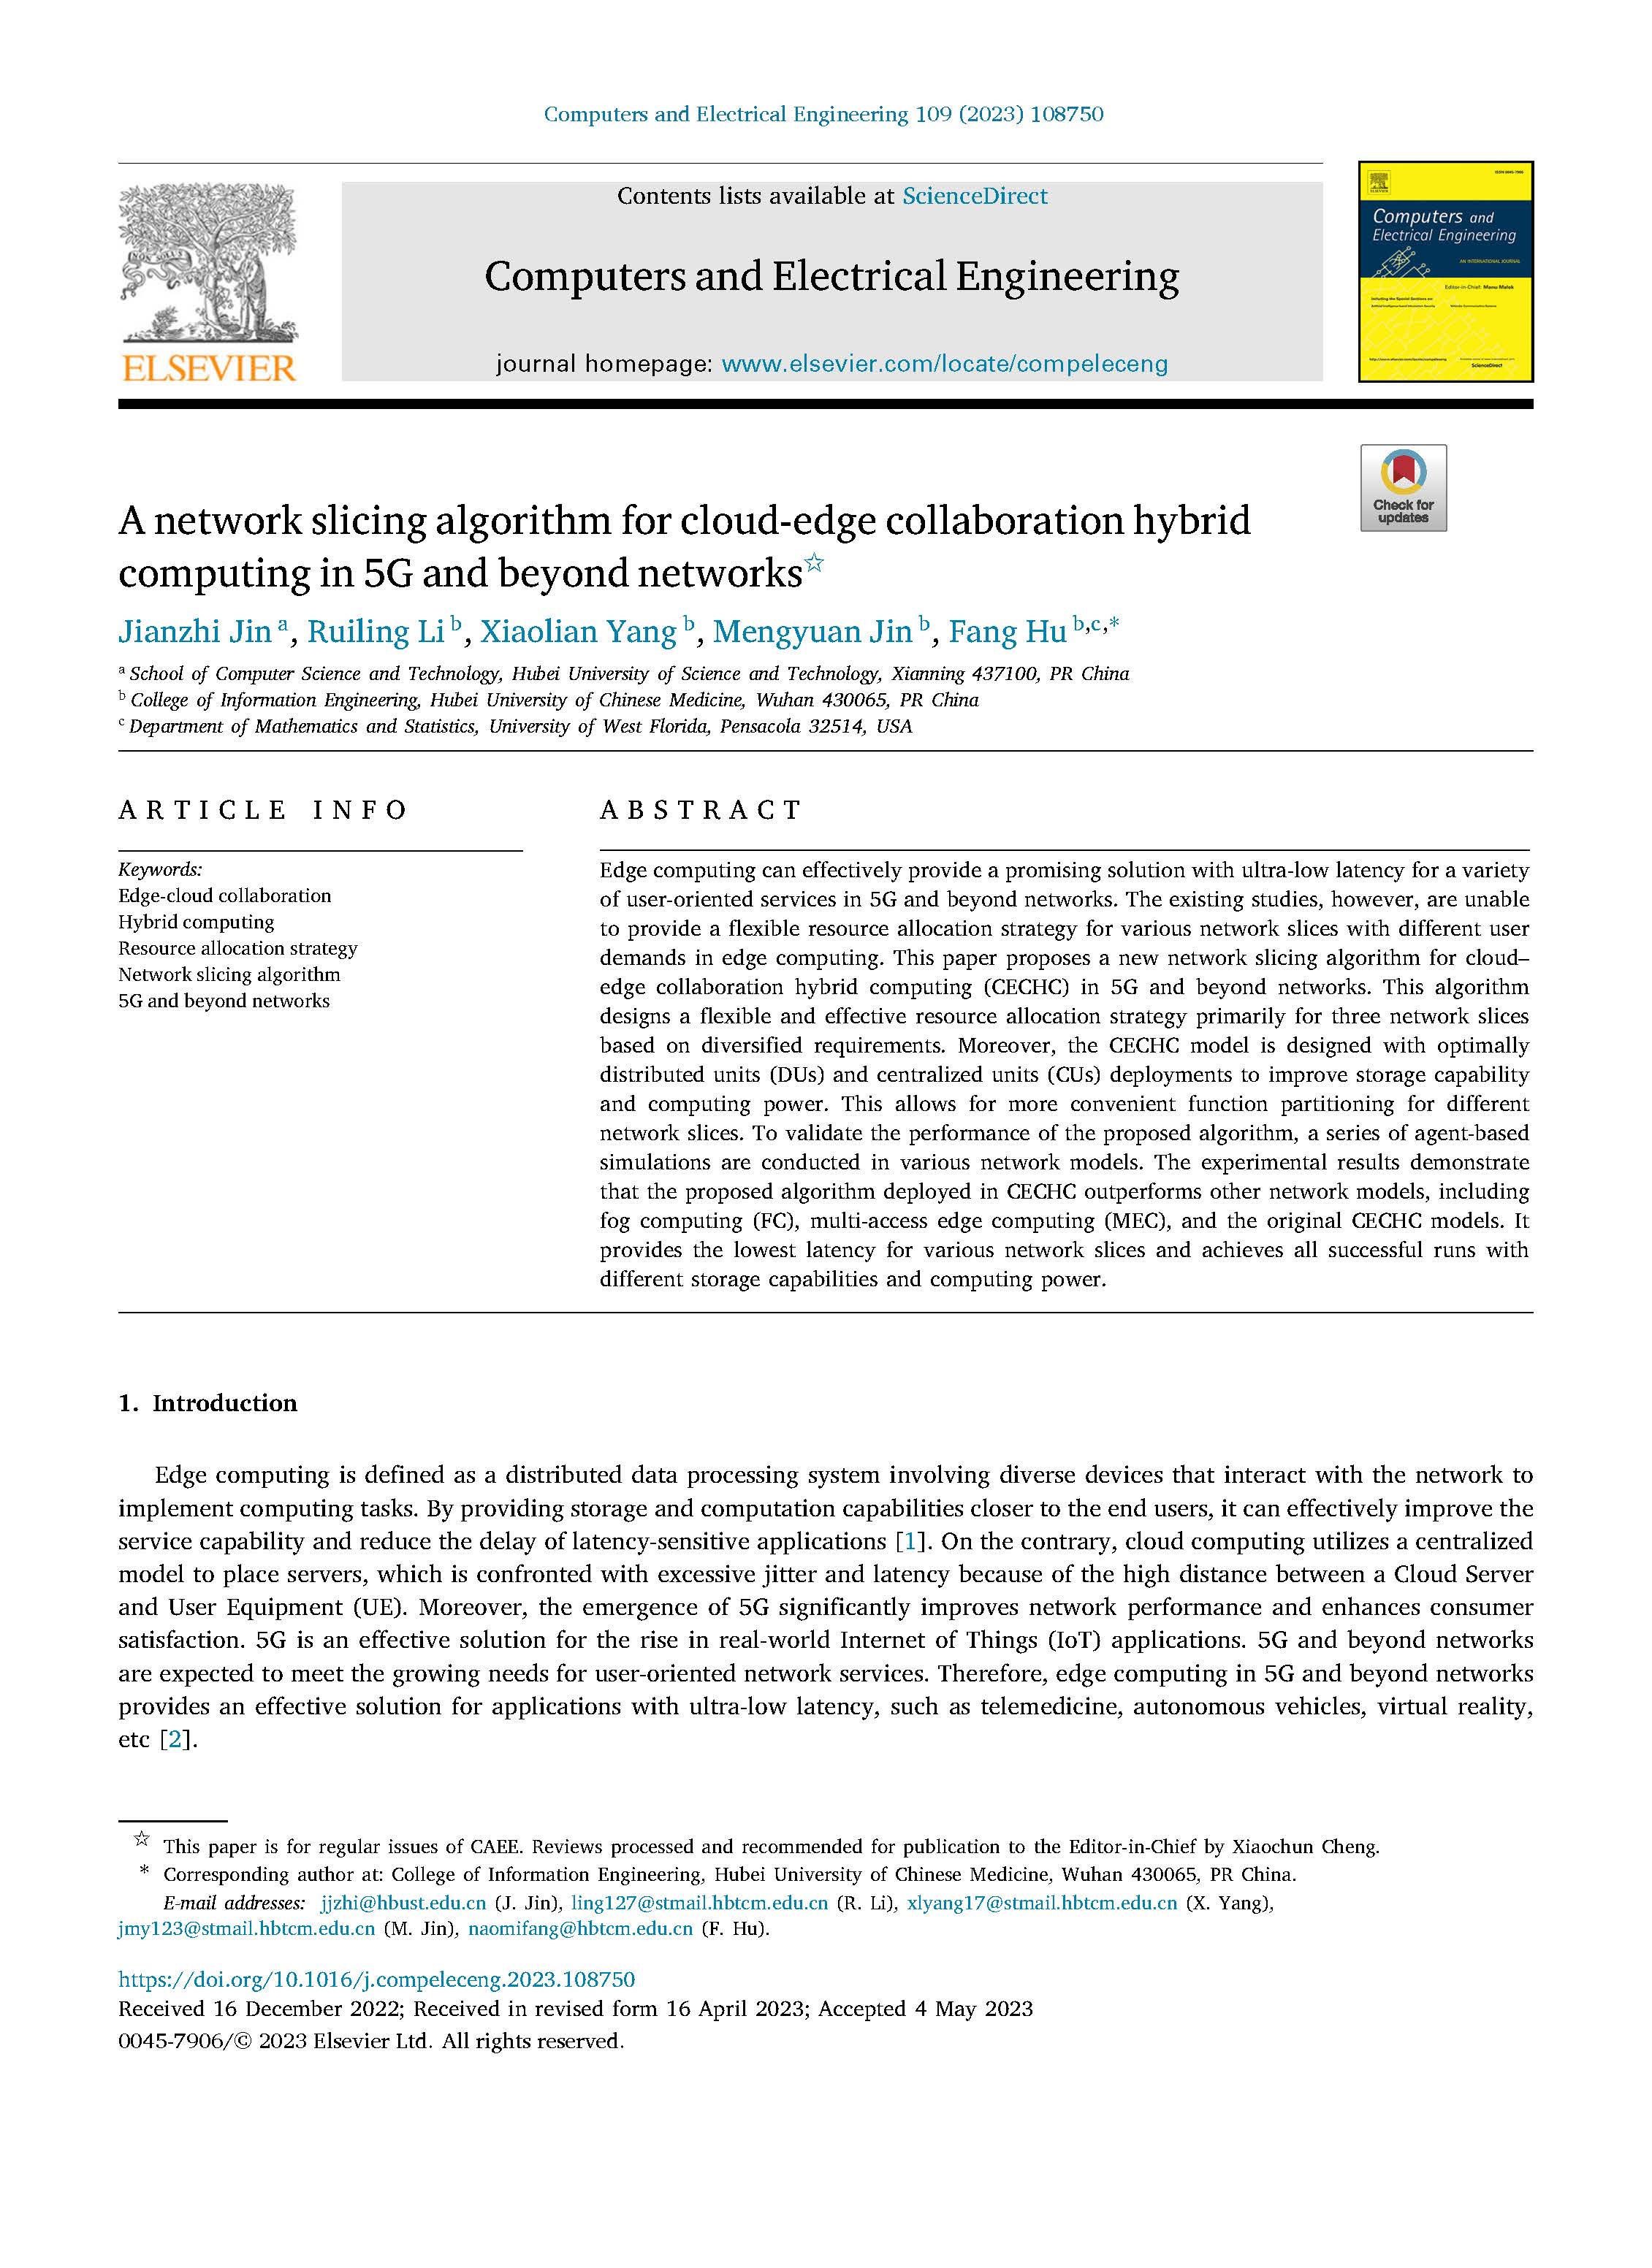 A network slicing algorithm for cloud-edge collaboration hybrid computing in 5G and beyond networks (SCI)